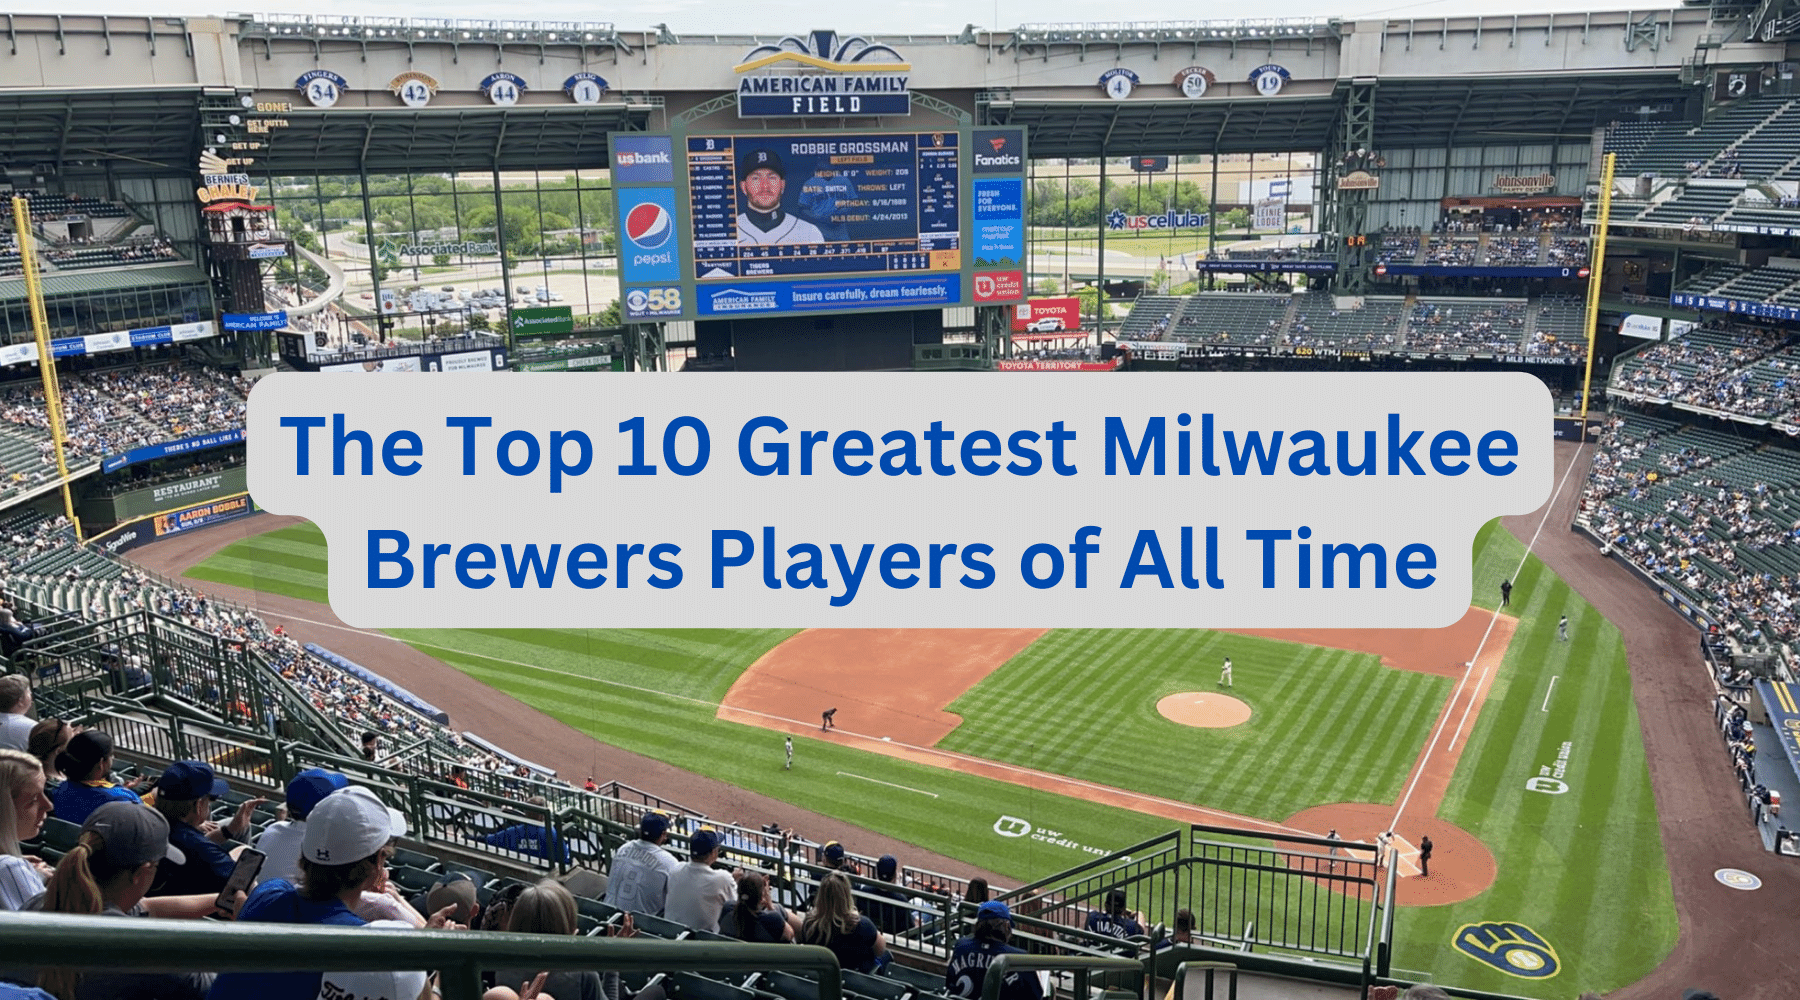 The Top 10 Greatest Milwaukee Brewers Players of All Time